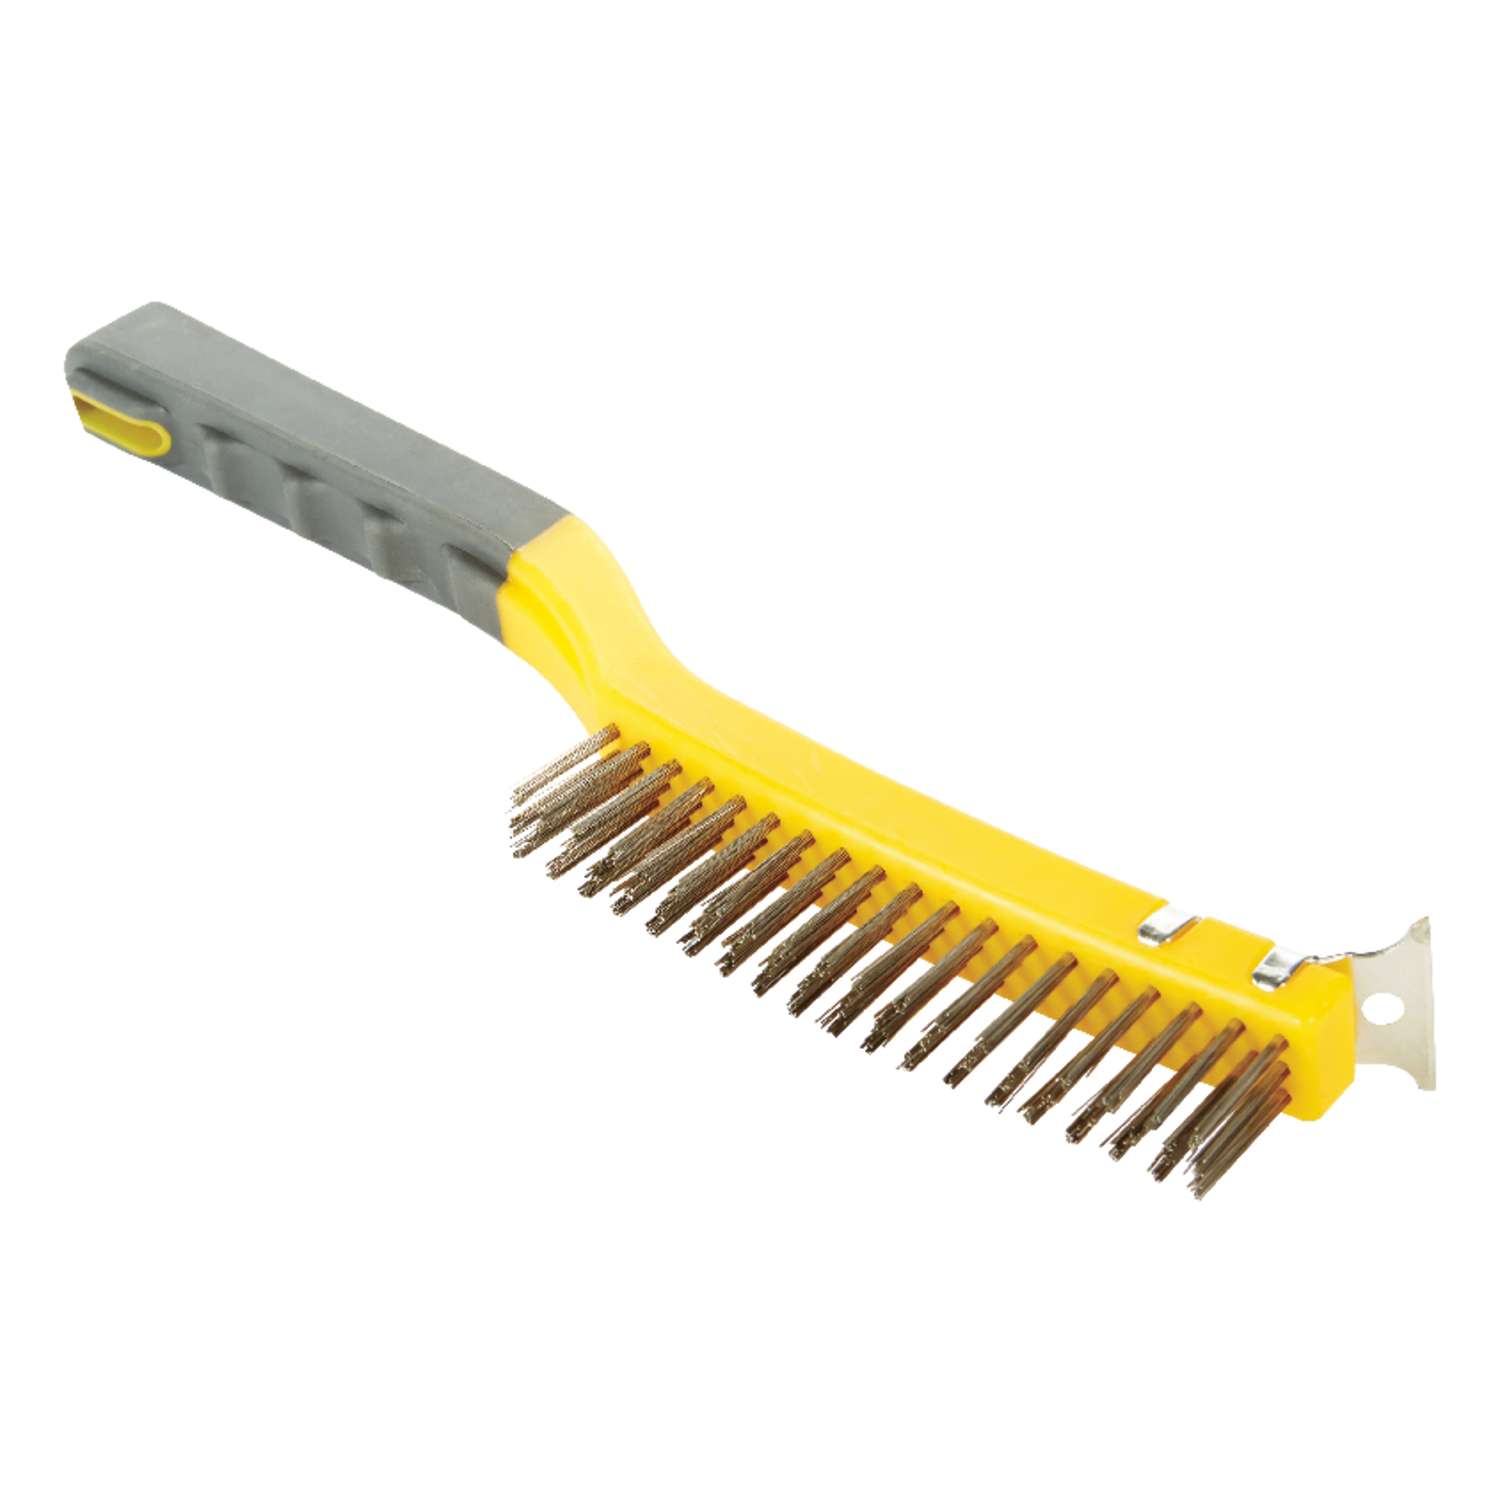 Carpet Brush,Carpet Brush for Dog Hair,Stainless Steel Wire Deck Brush with  Wooden Back and Galvanized Steel Wire,Floor Scrub Brush for